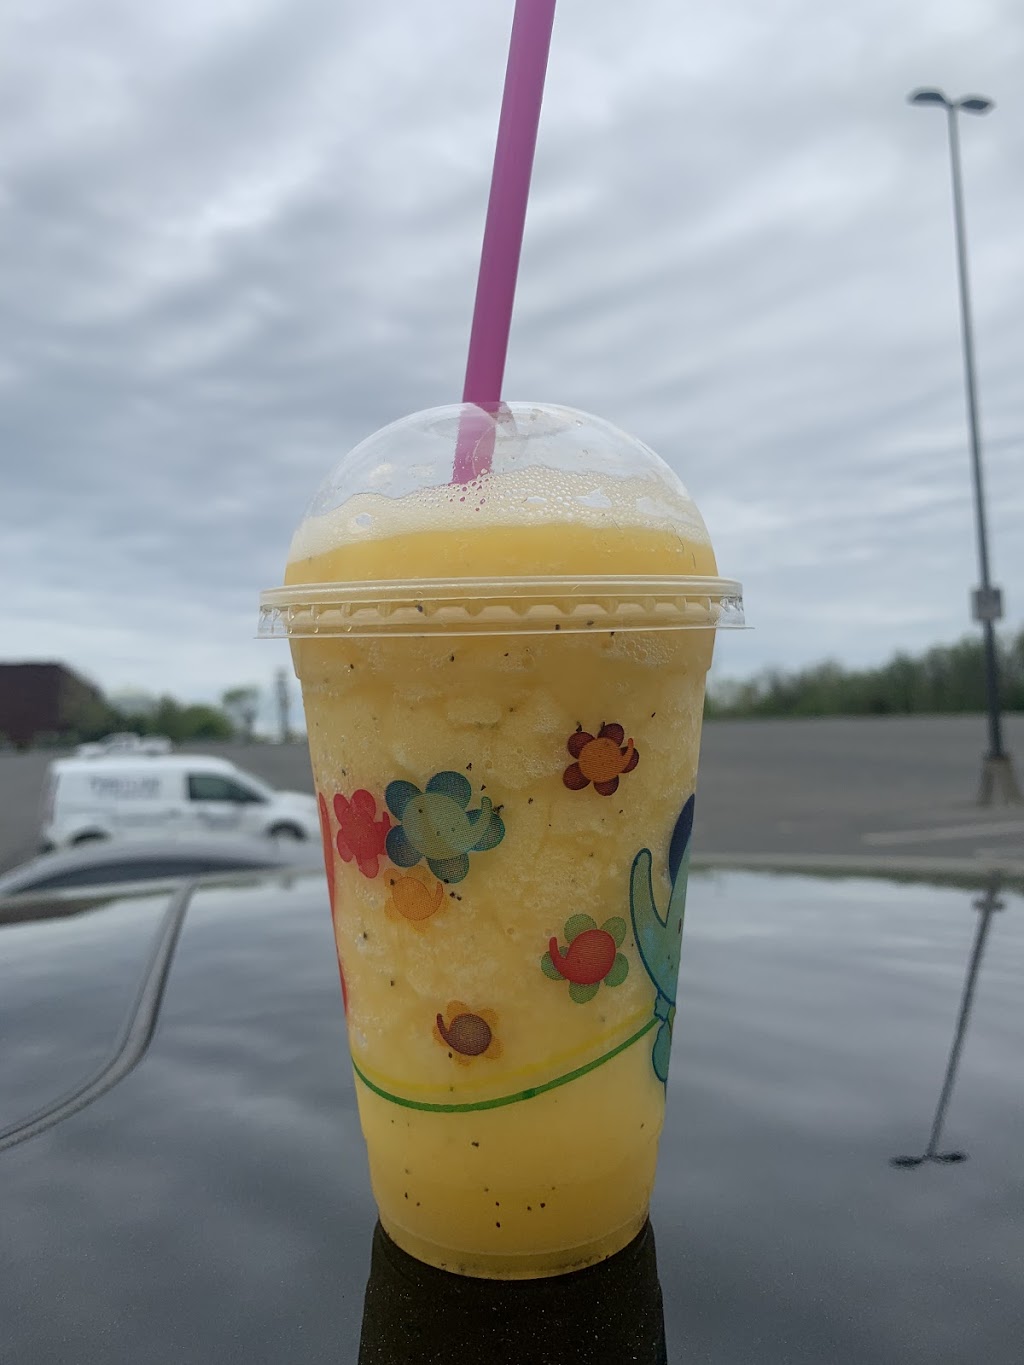 Co-Cool Smoothie And Bubble Tea | 3710 US-9, Freehold, NJ 07728 | Phone: (724) 208-5634